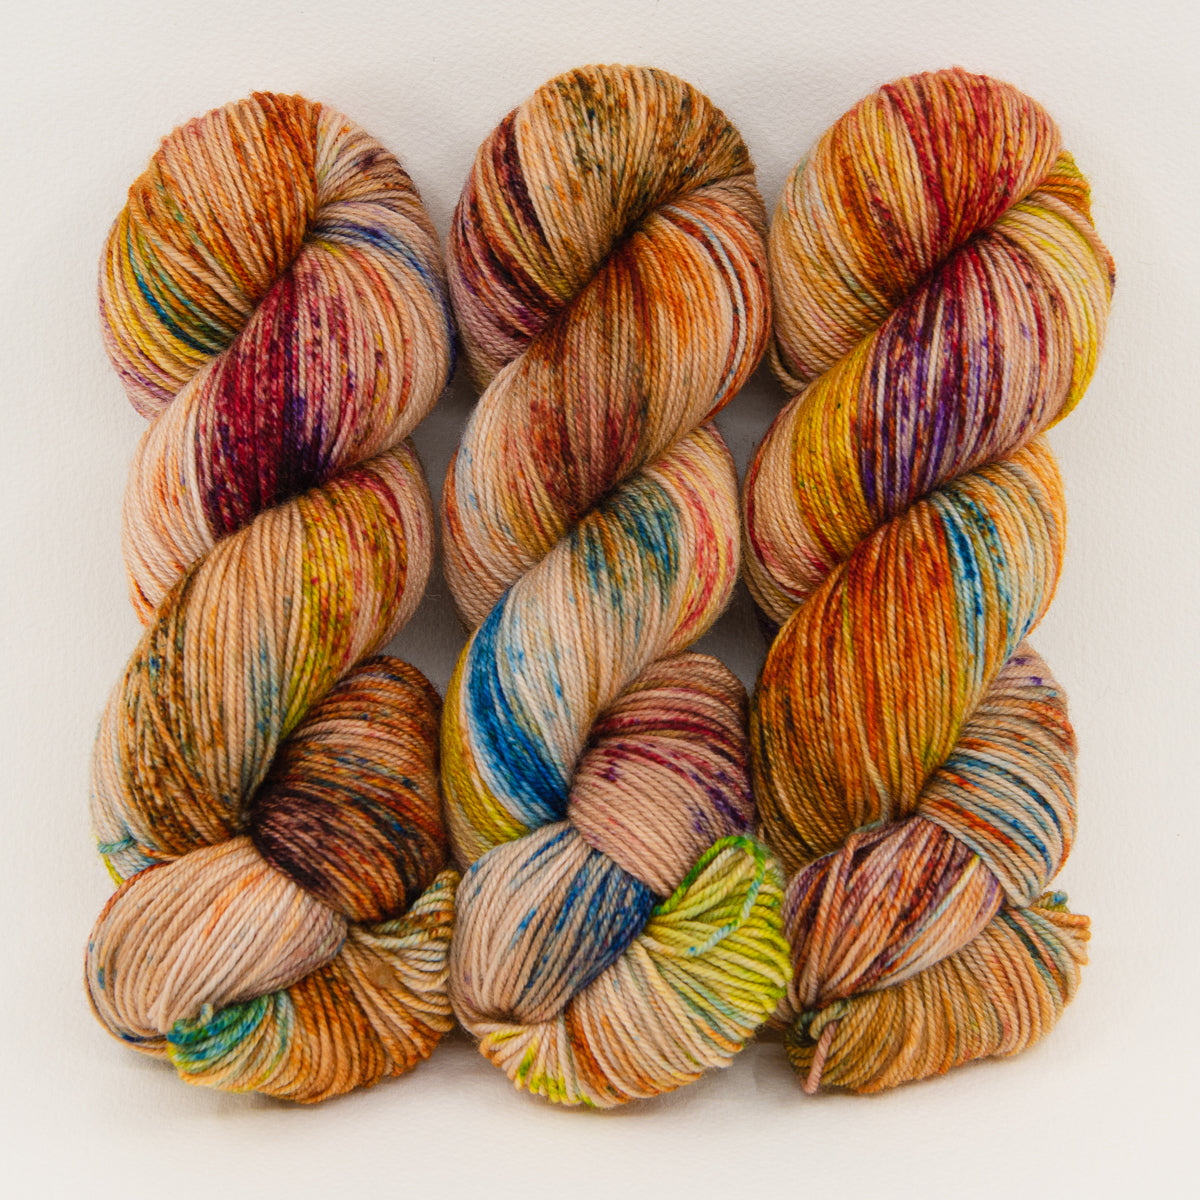 Autumn Leaves in Fingering / Sock Weight